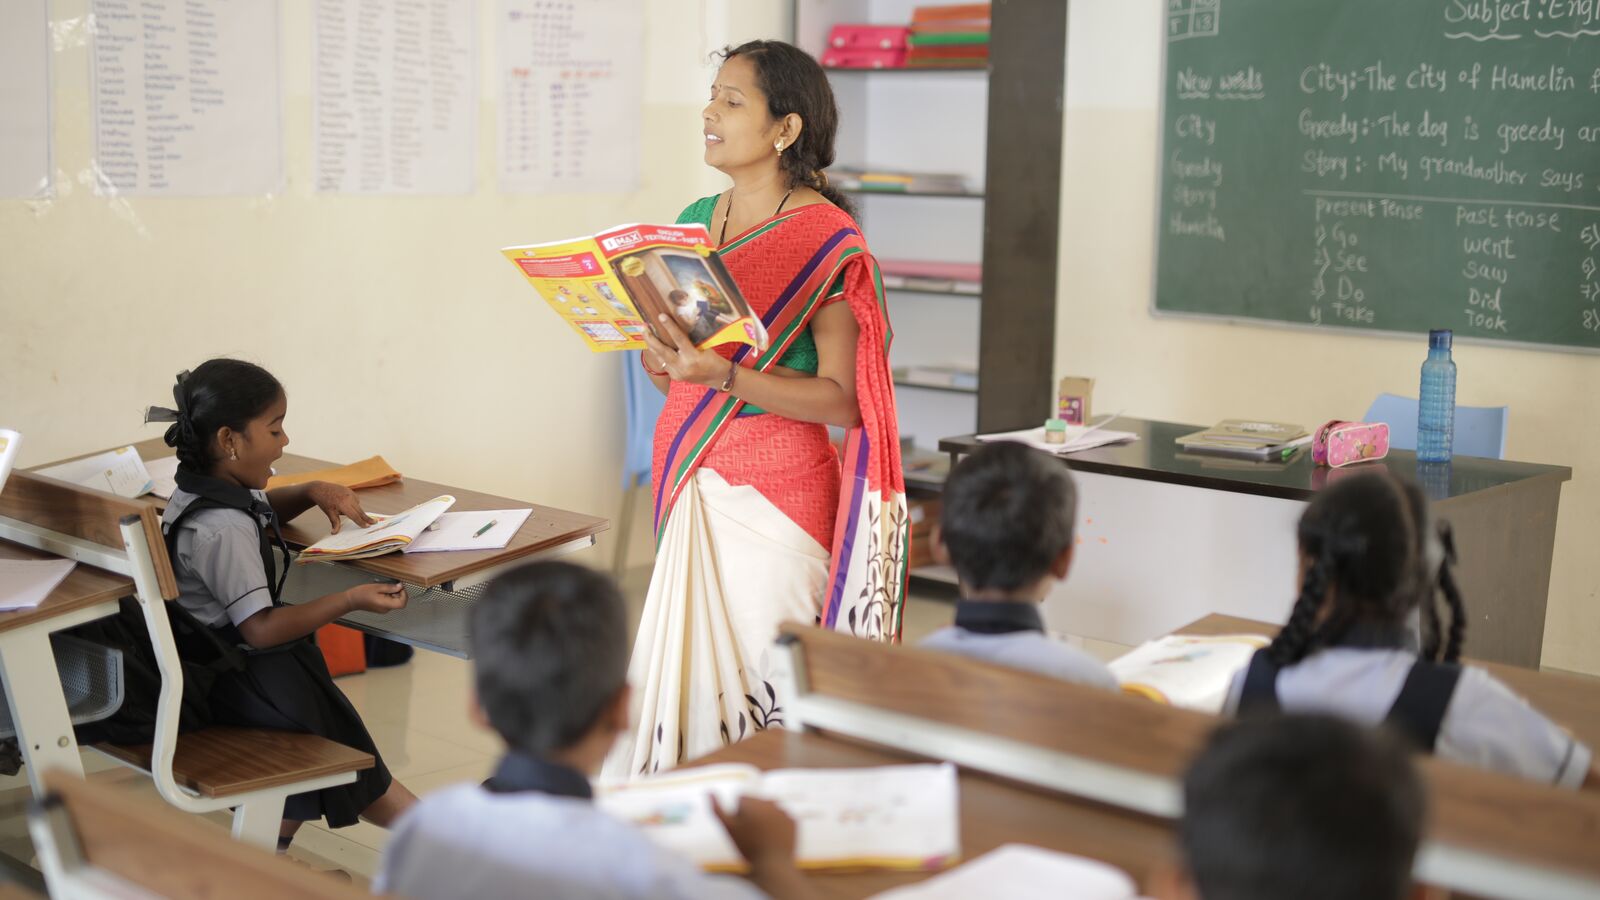 A female teacher in India uses ClassKlap to instruct students.